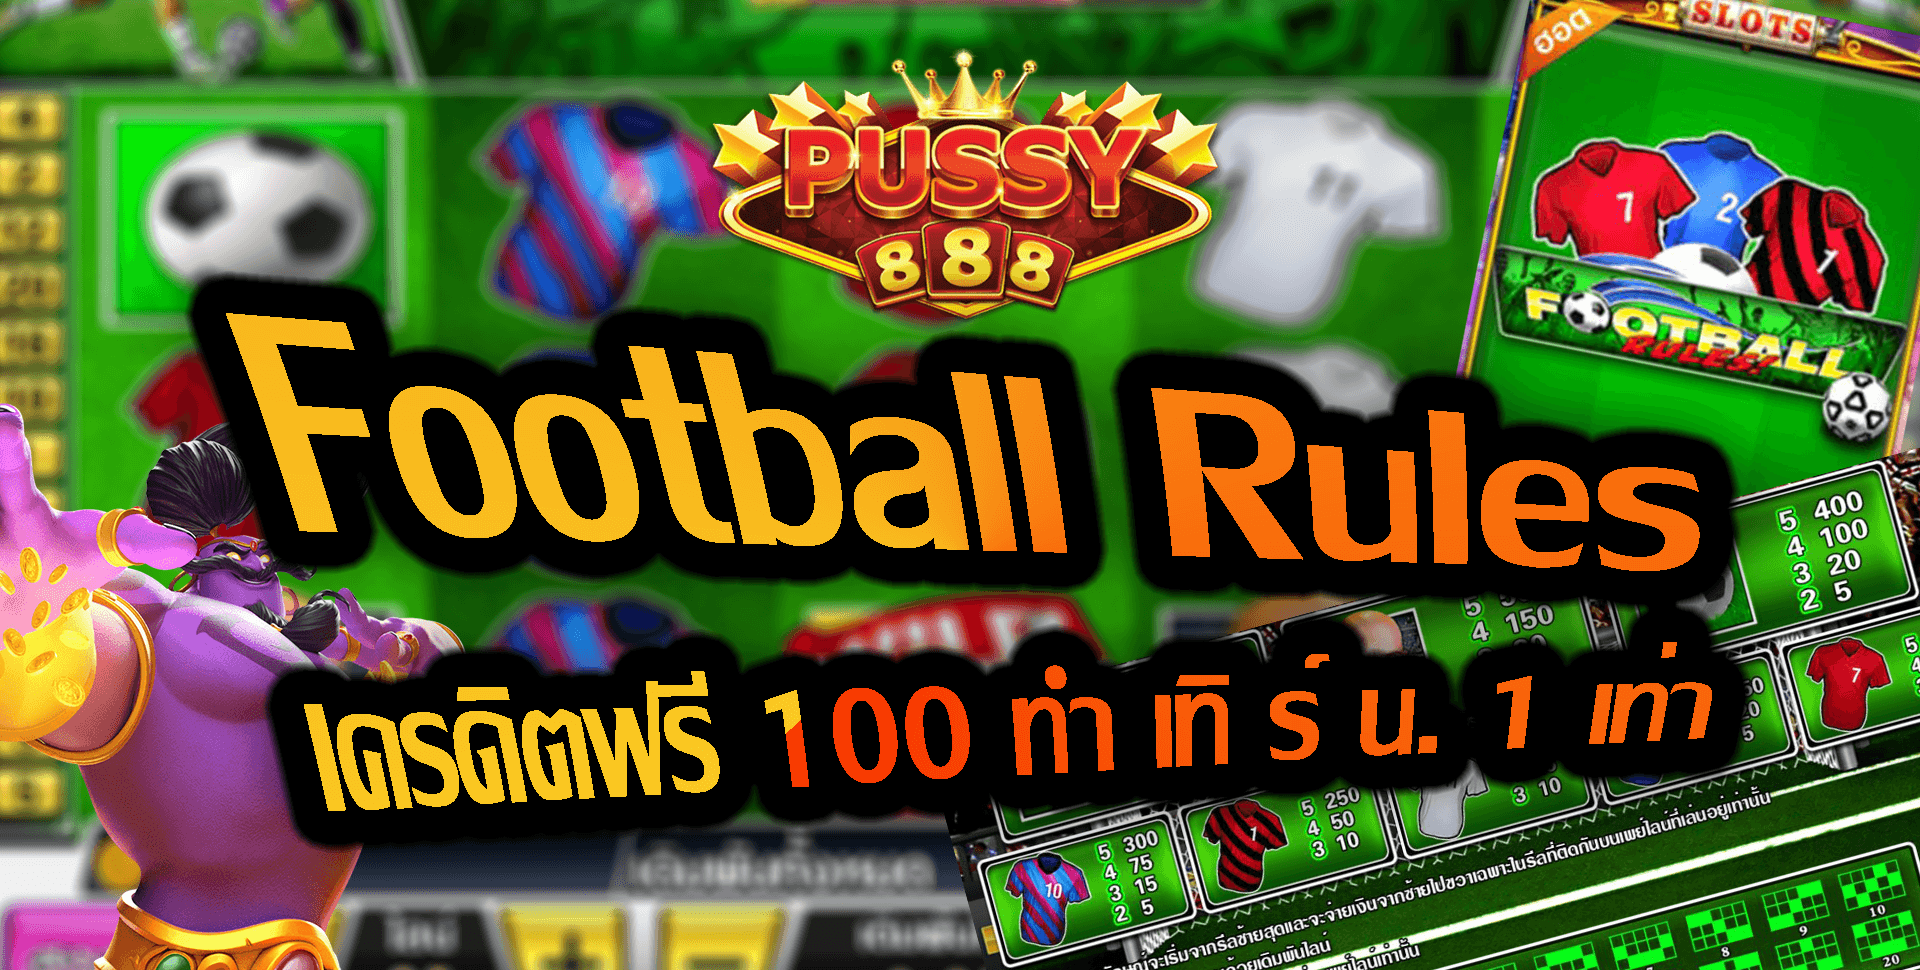 Pussy888-Football Rules-puss888-5